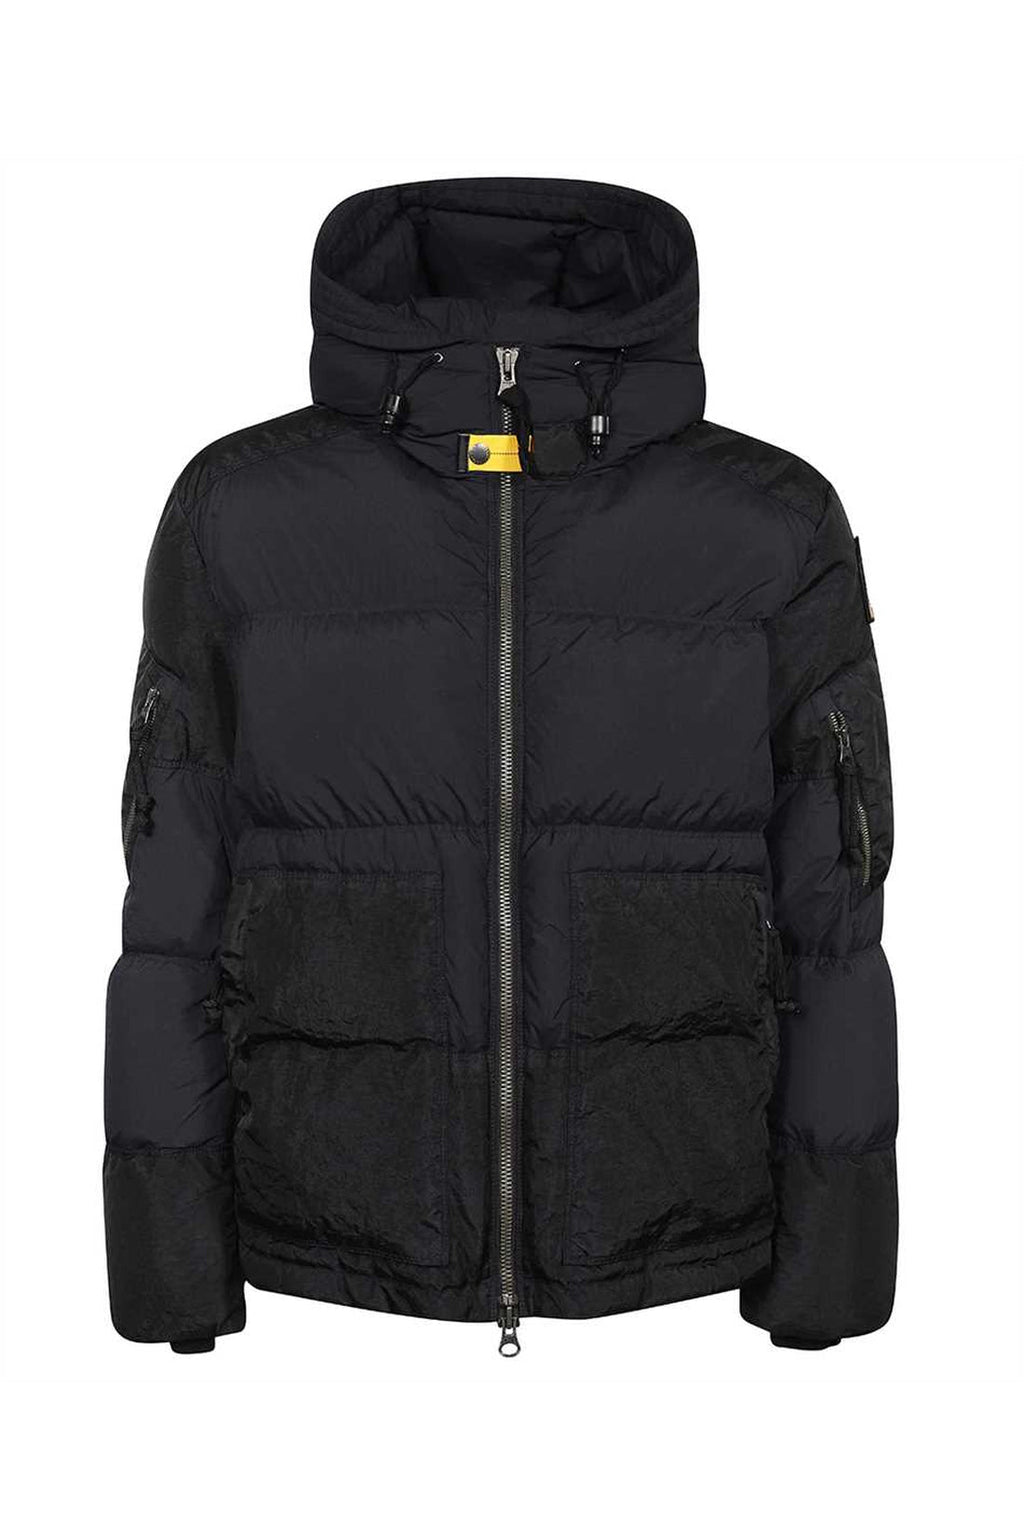 Parajumpers Phat Hooded Padded Jacket in Gray